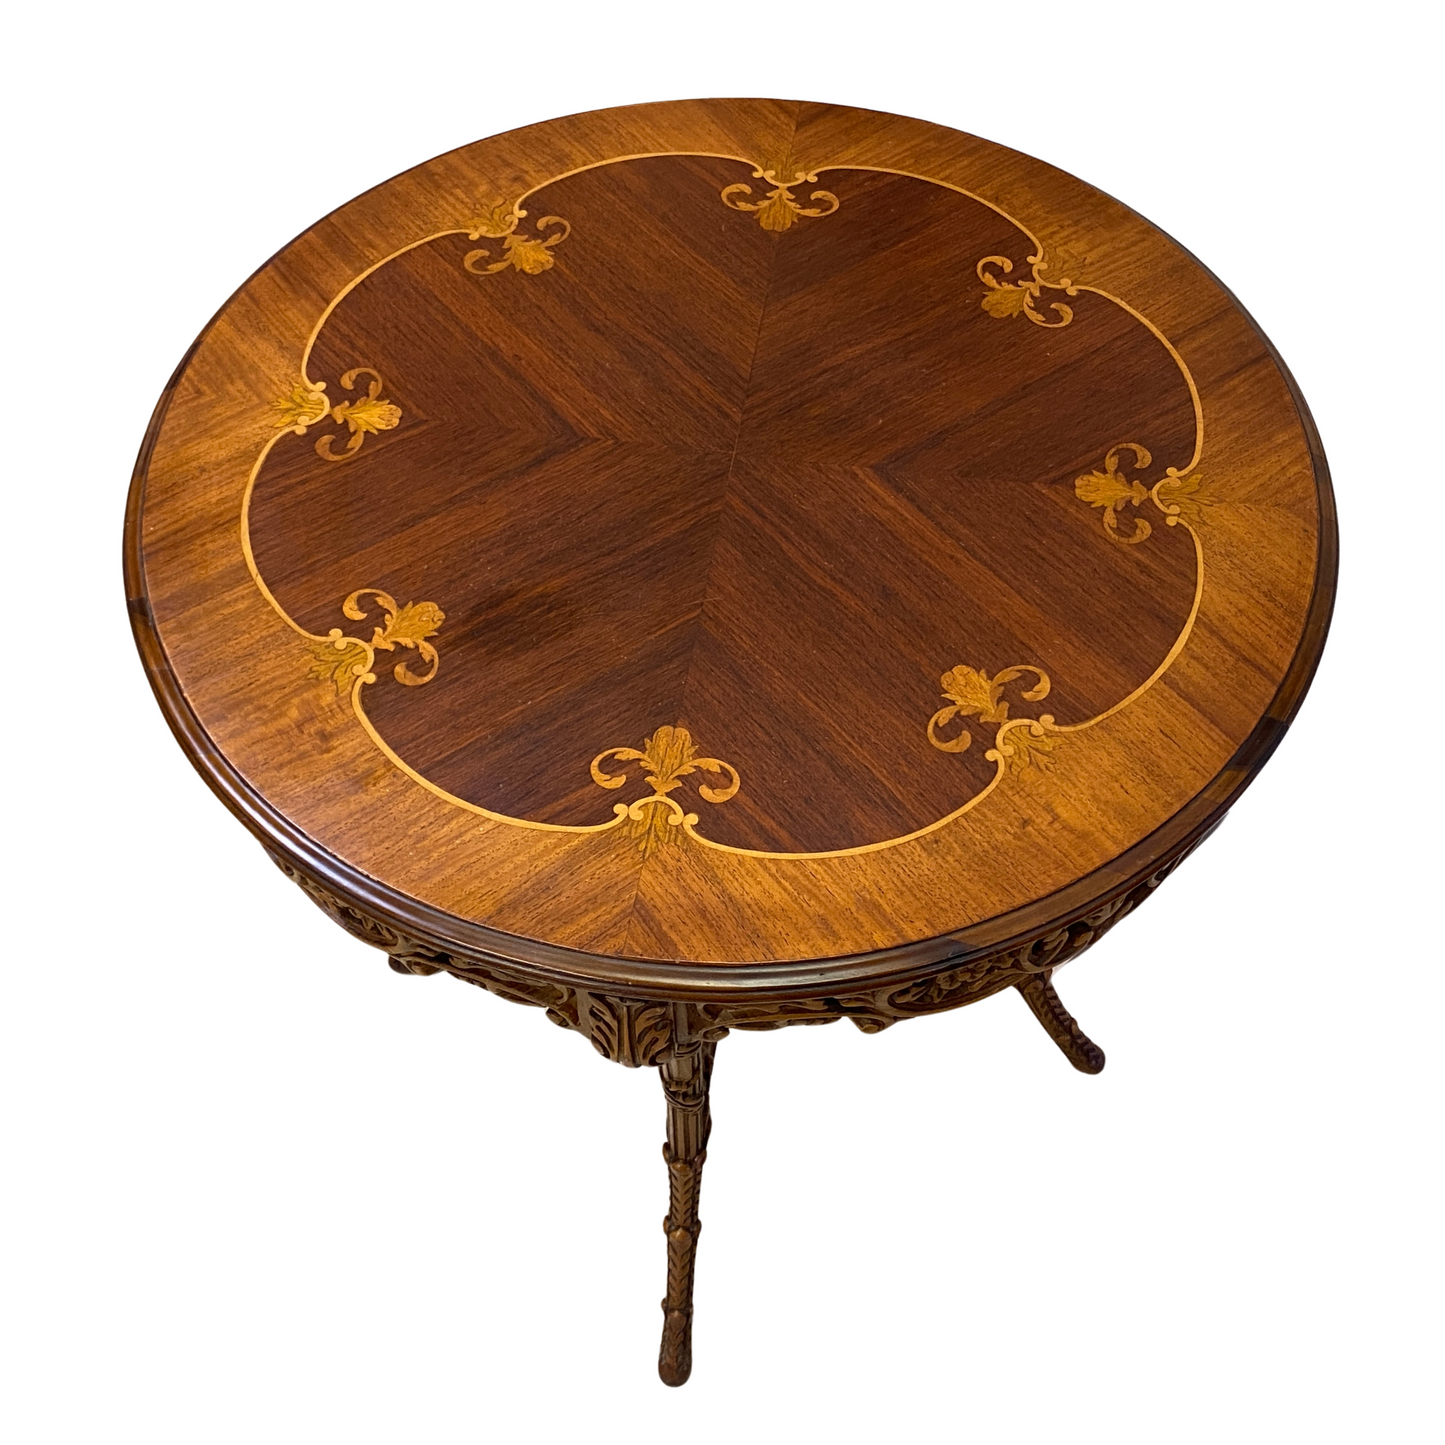 Italian Inlaid Marquetry / Parlor Table